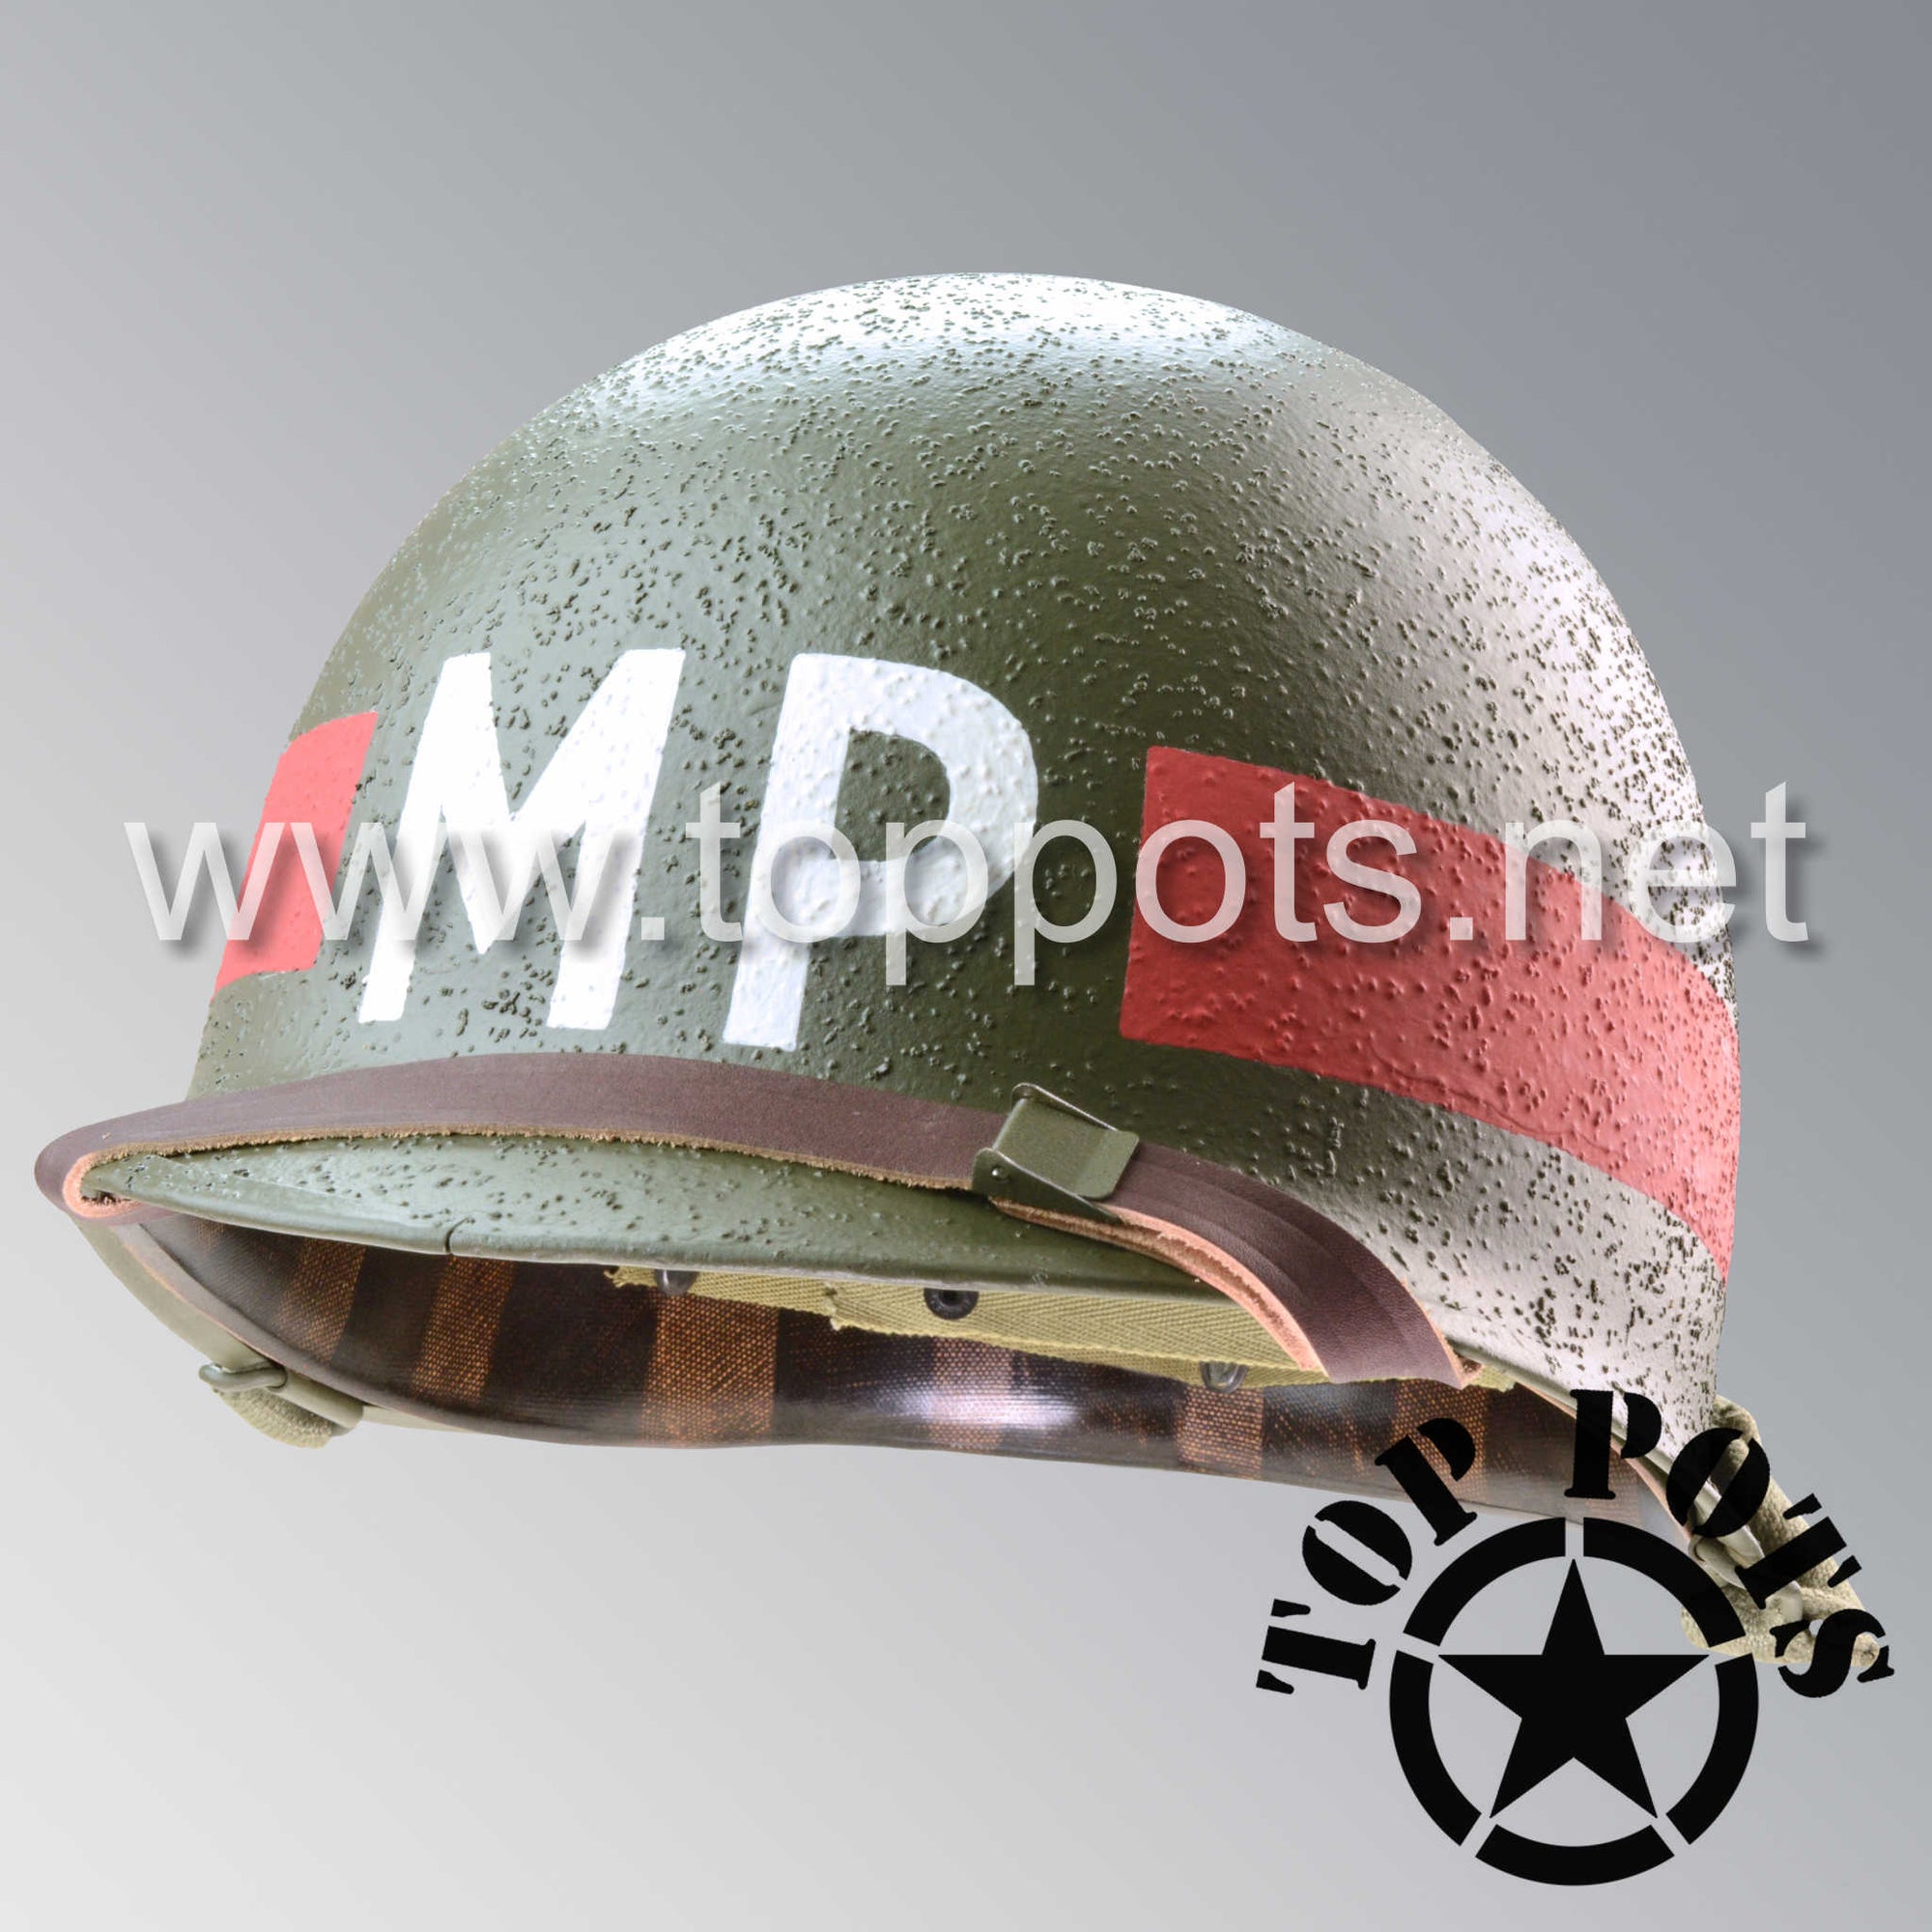 WWII US Army Restored Original M1 Infantry Helmet Swivel Bale Shell and Liner with Red Headquarter HQ MP Military Police Emblem